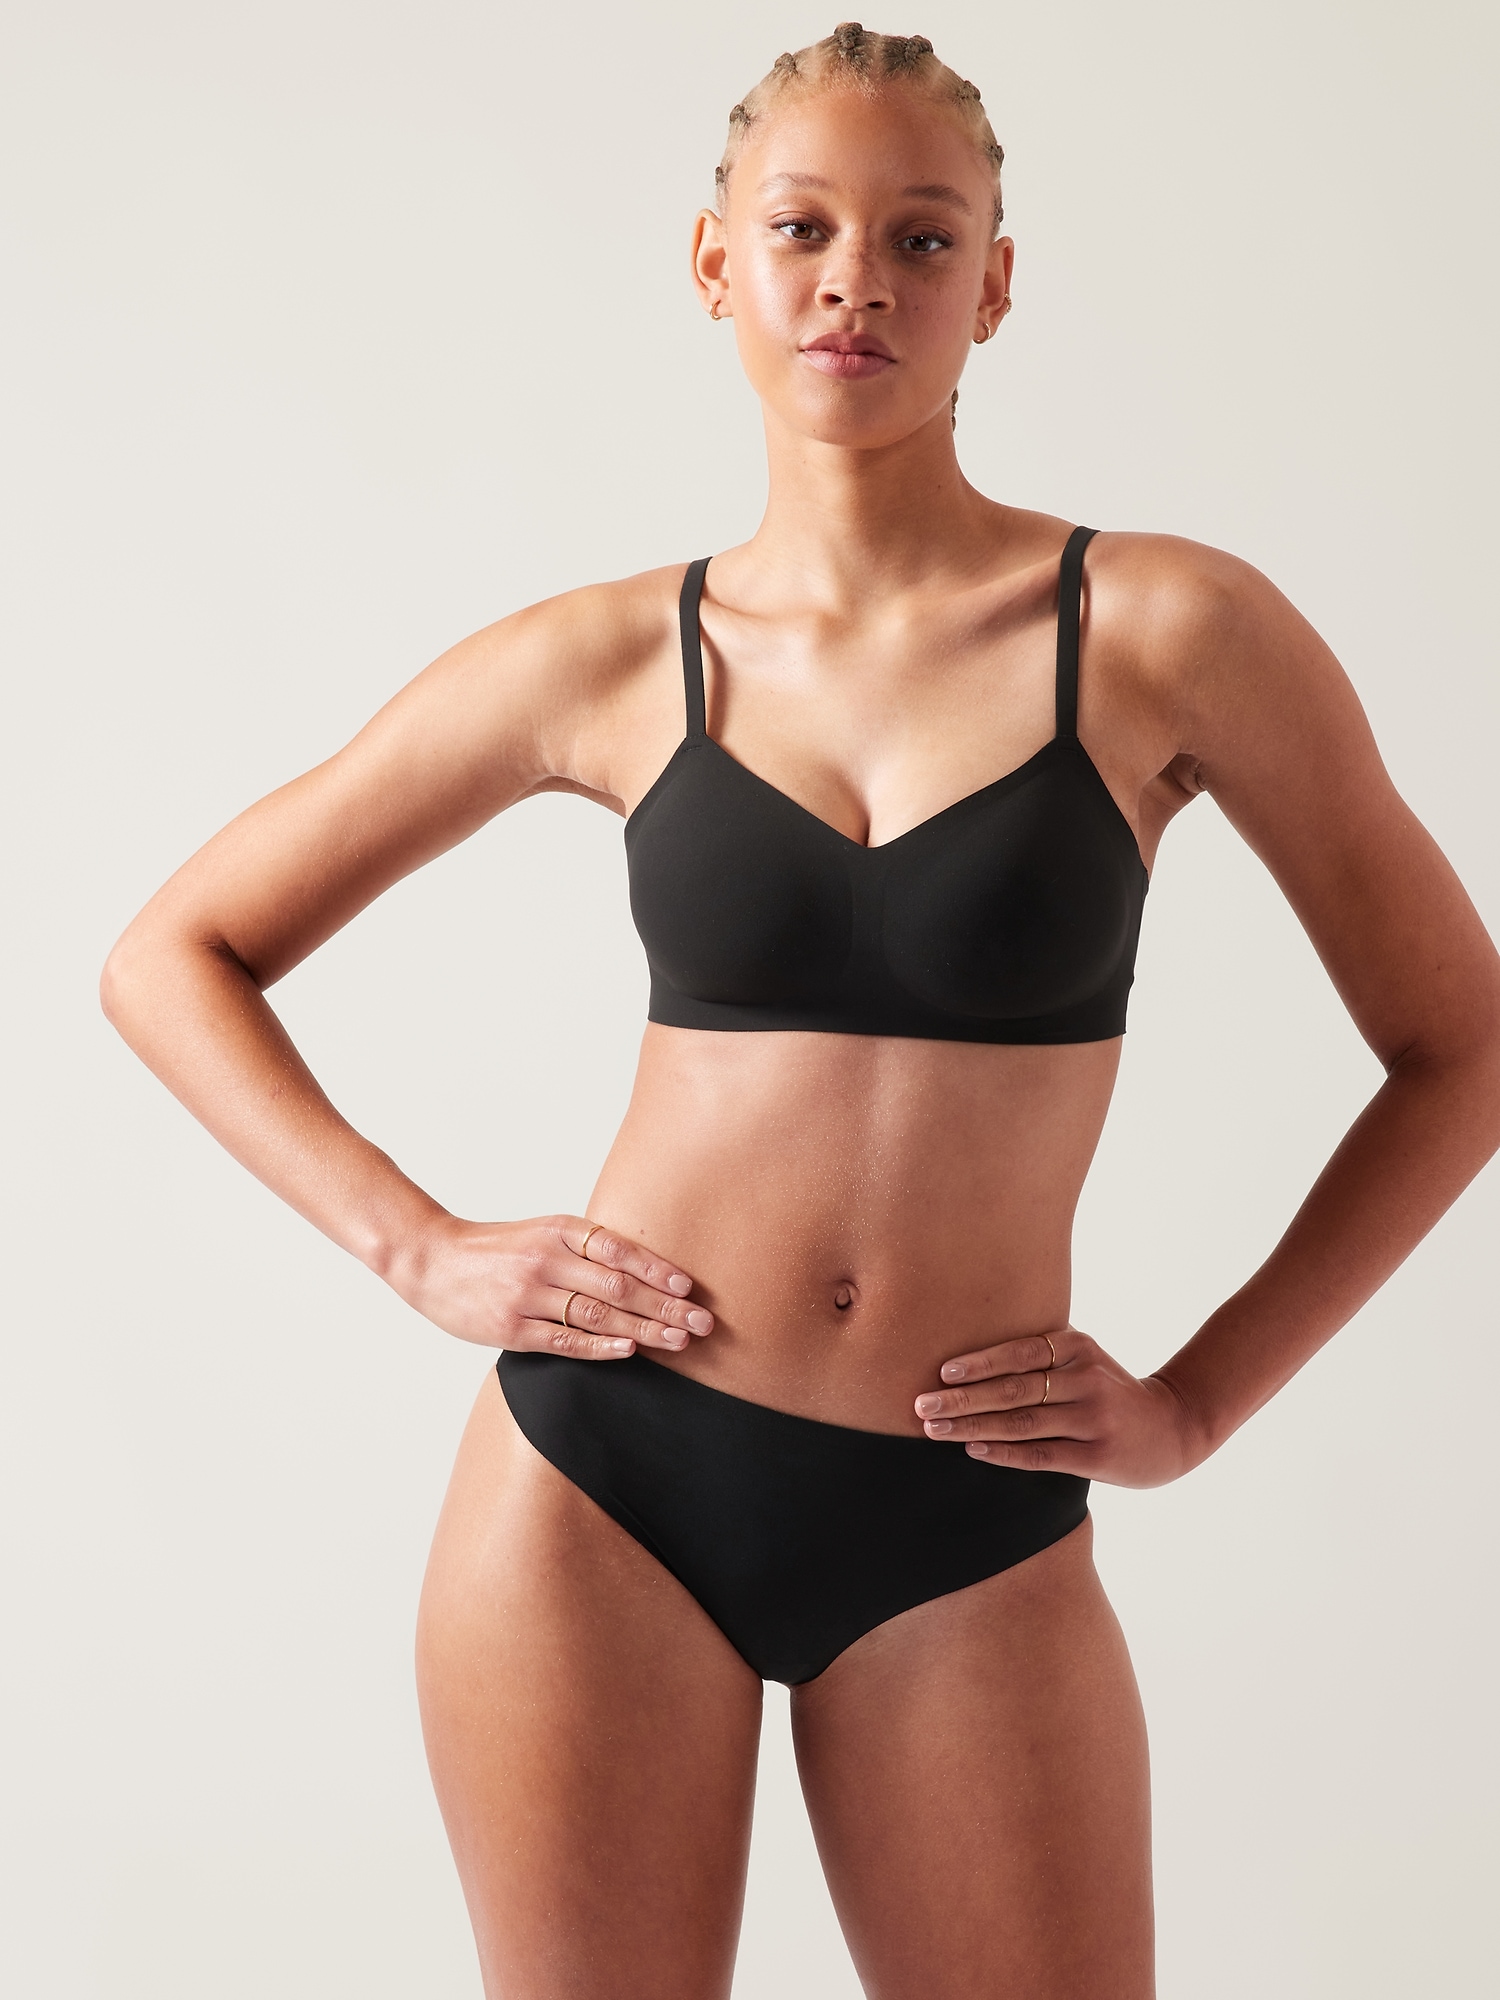 Athleta sports bra 34D black adjustable lightly padded non removable Size  undefined - $27 - From Adriana